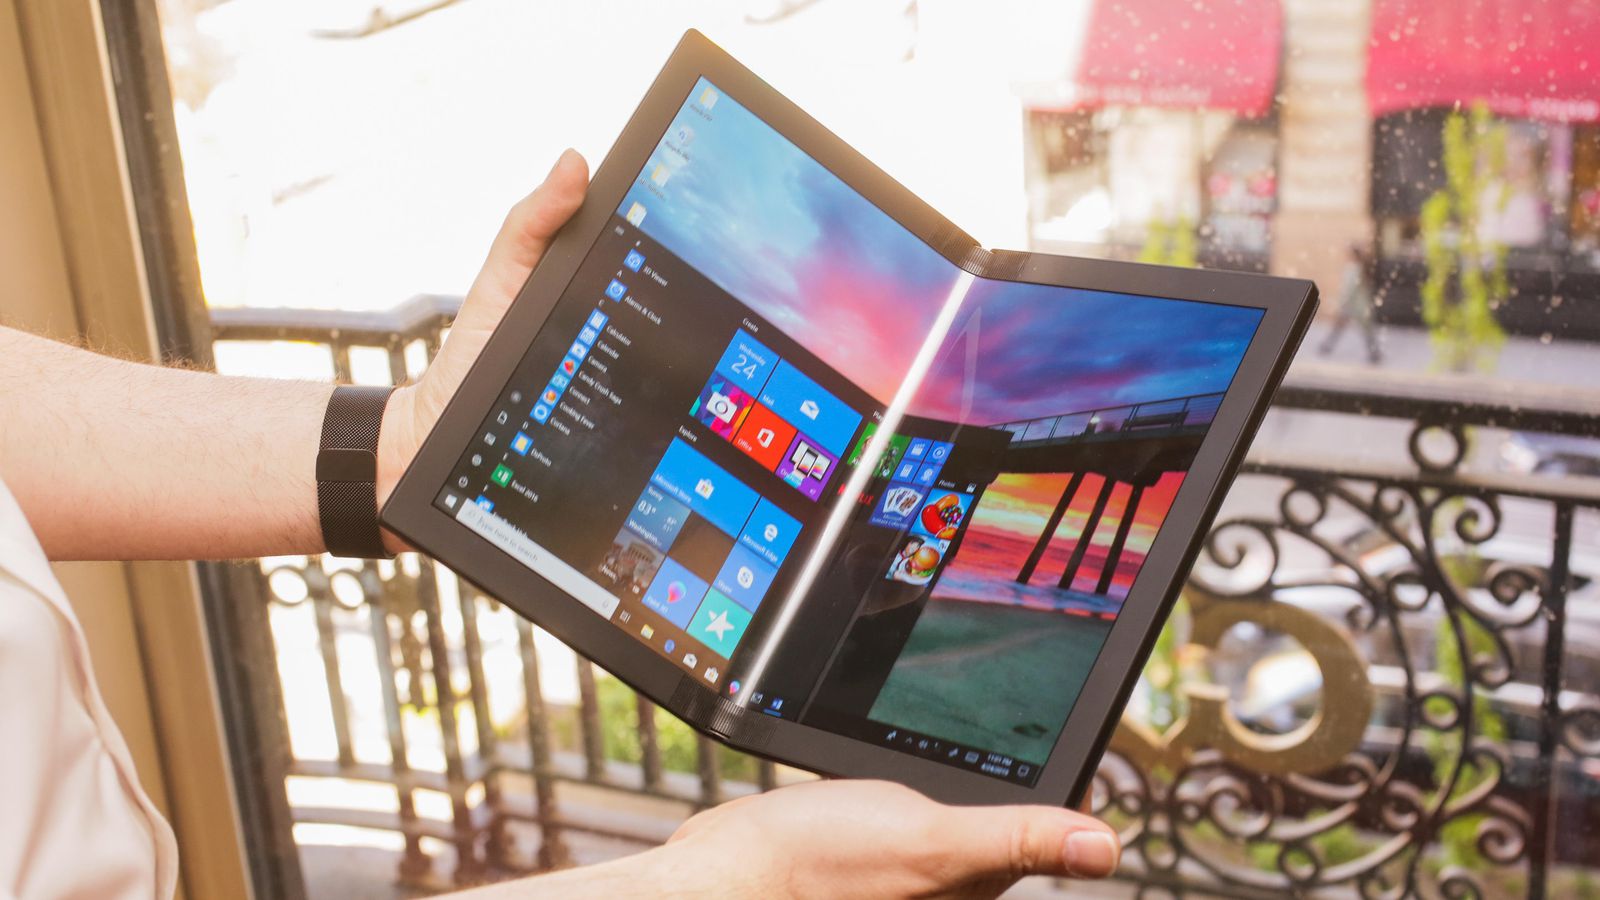 Lenovo ThinkPad X1, the world's first foldable screen notebook